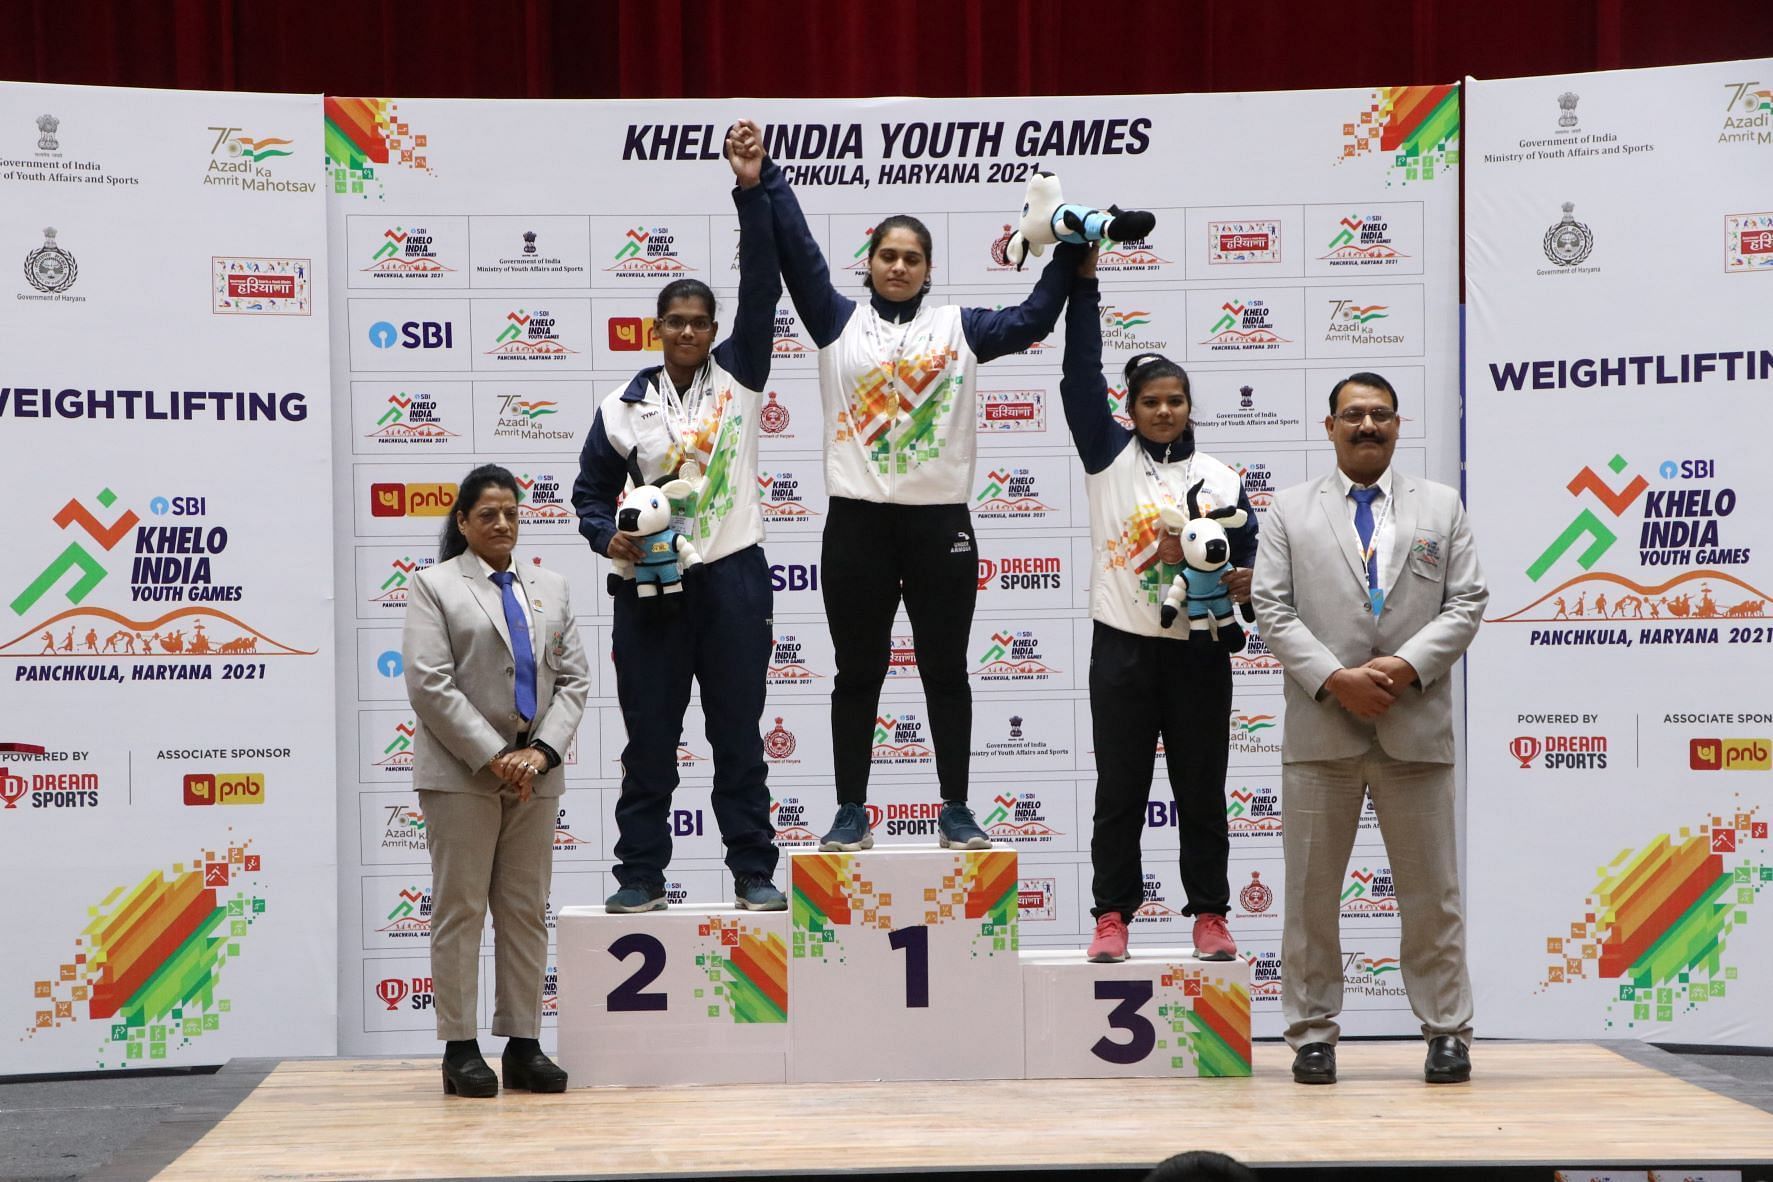 The women&#039;s 76kg weightlifting medallists at the Khelo India Youth Games. (PC: Khelo India)